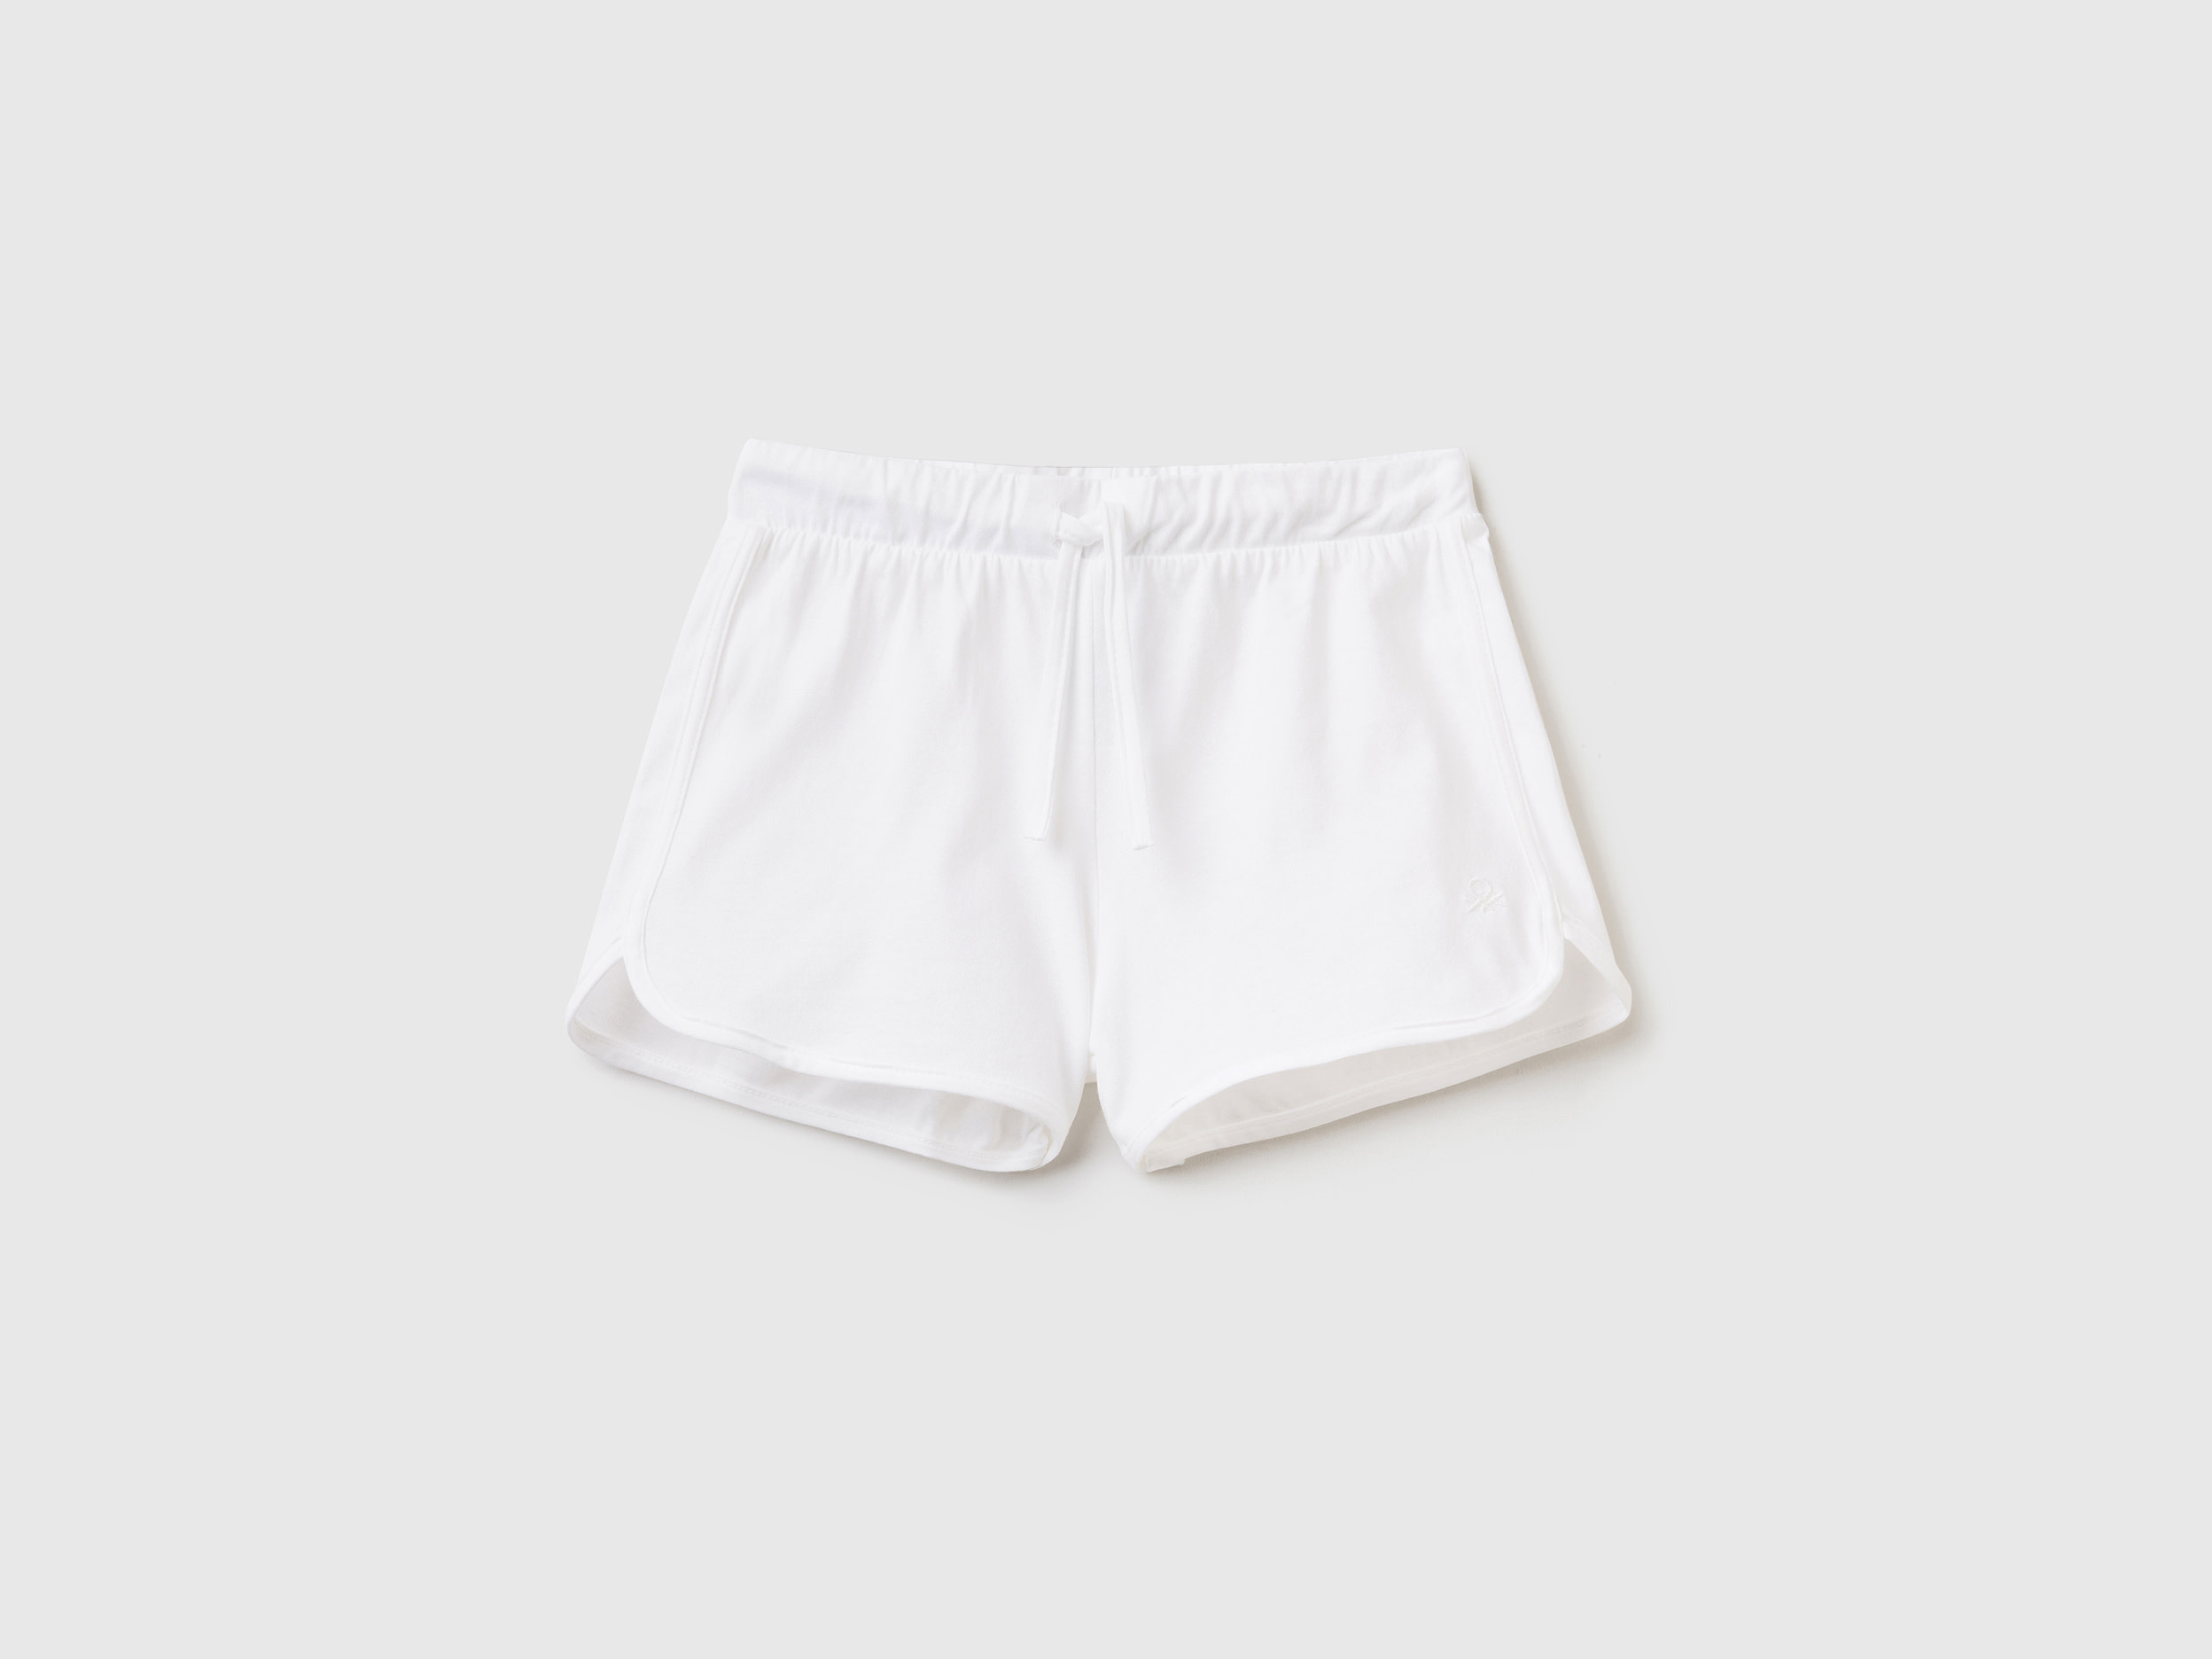 Image of Benetton, Runner Style Shorts In Organic Cotton, size 2XL, White, Kids